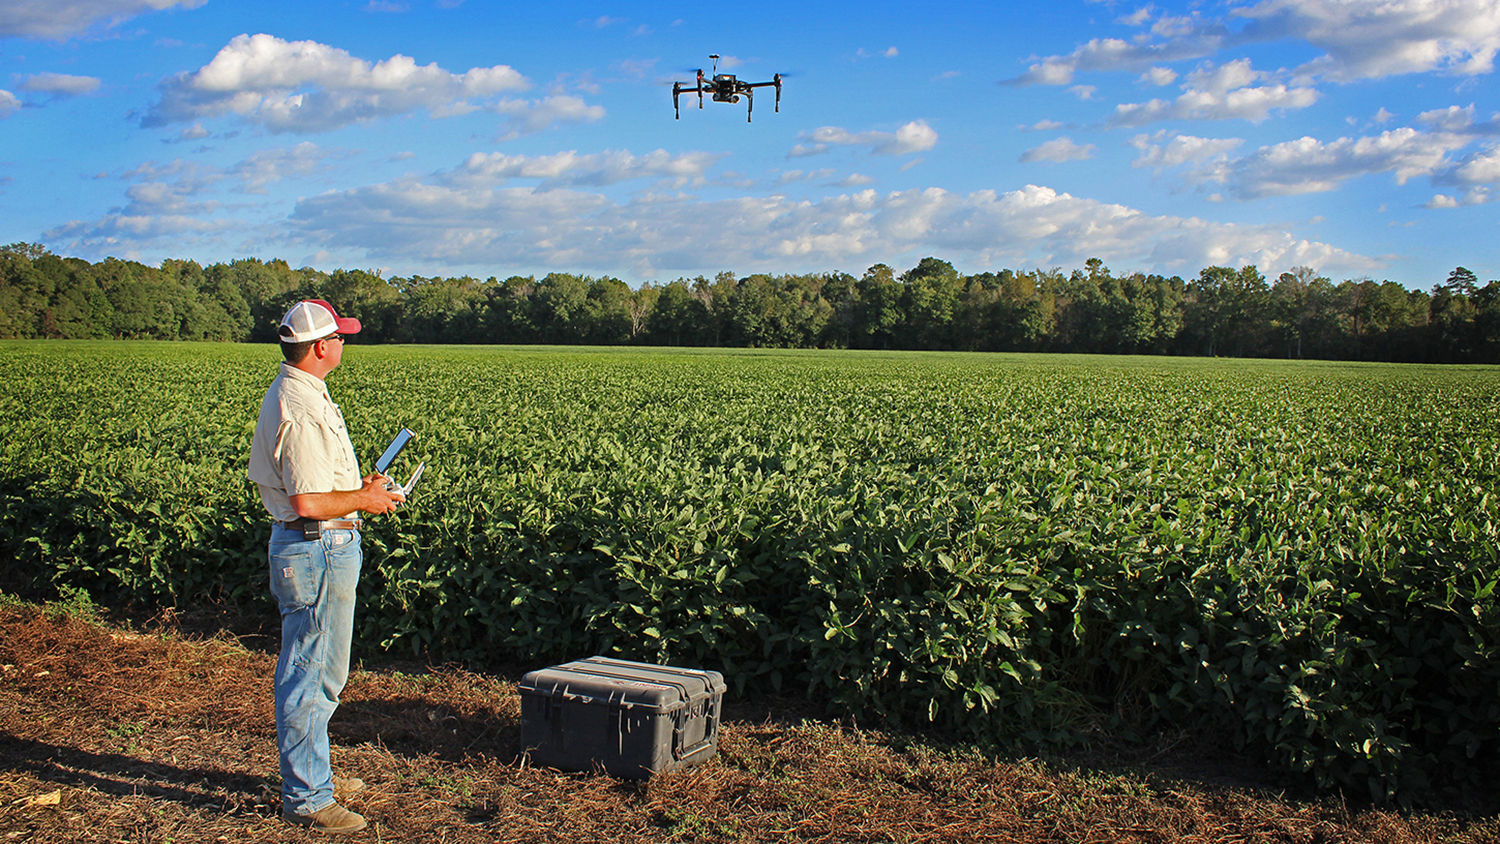 Man with drone flying over farm field